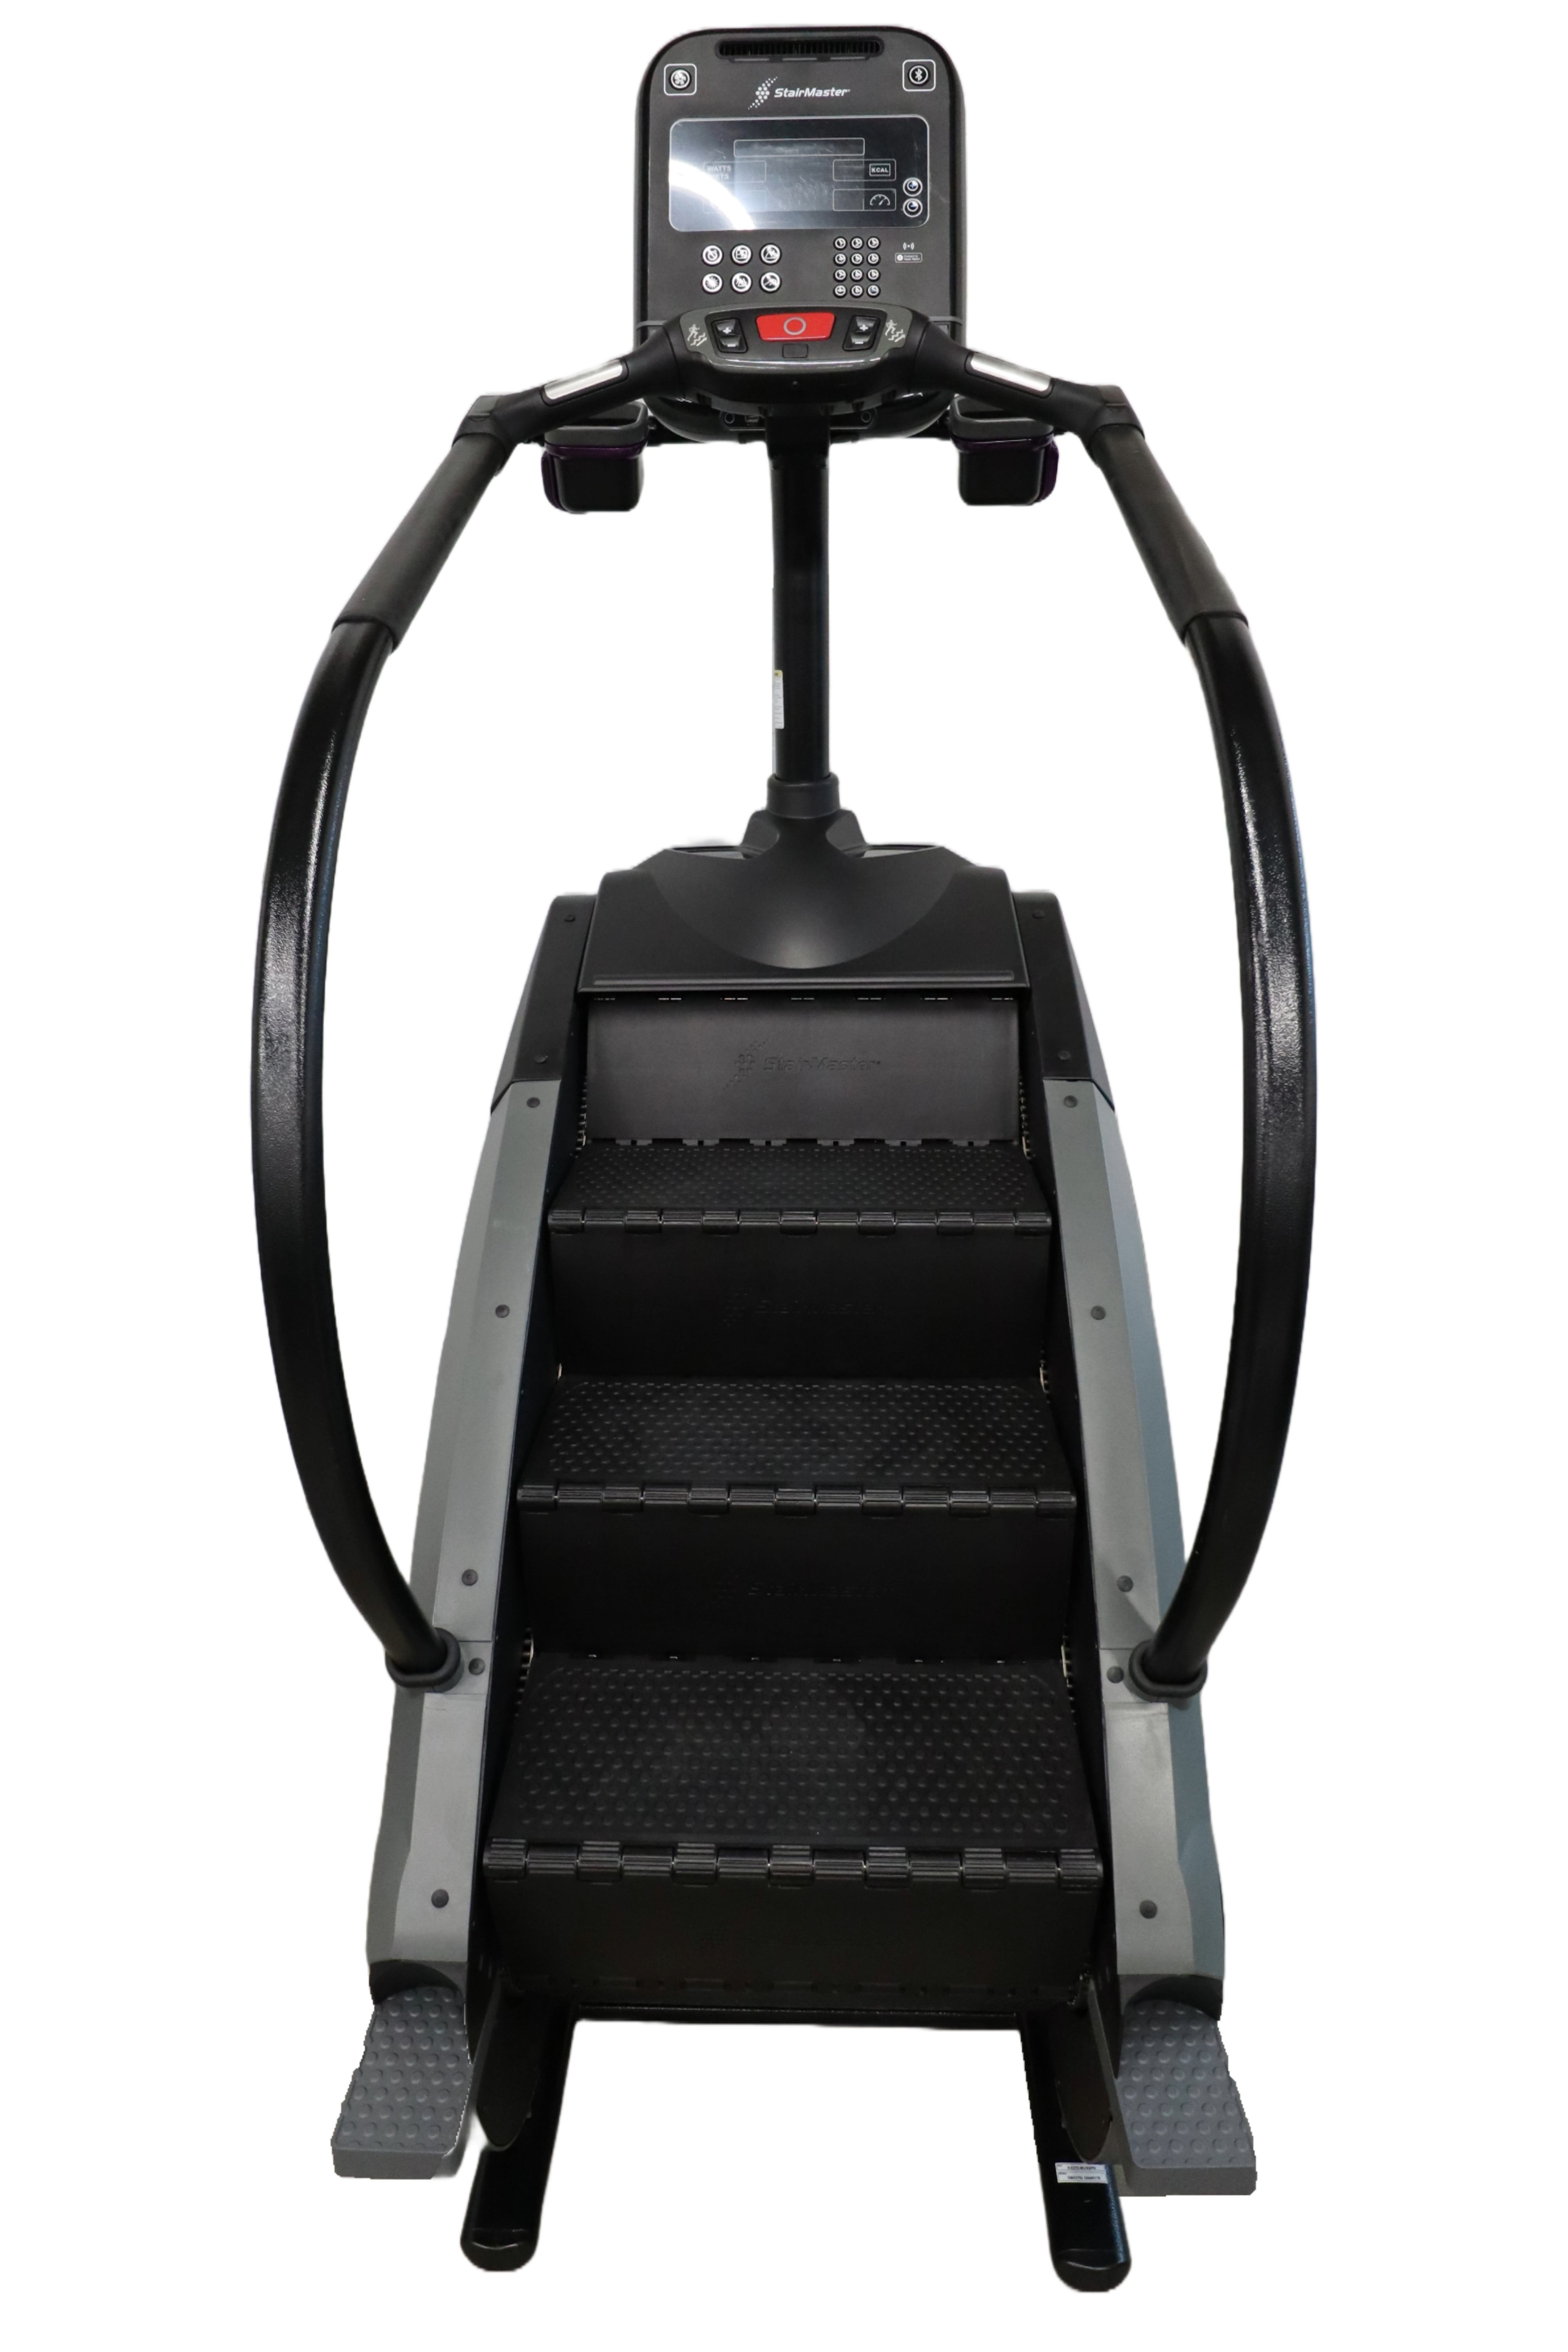 Used Stairmaster Gauntlet 9-5270-MUNBP0 Stairclimber Stepmill SM5270 Stepper